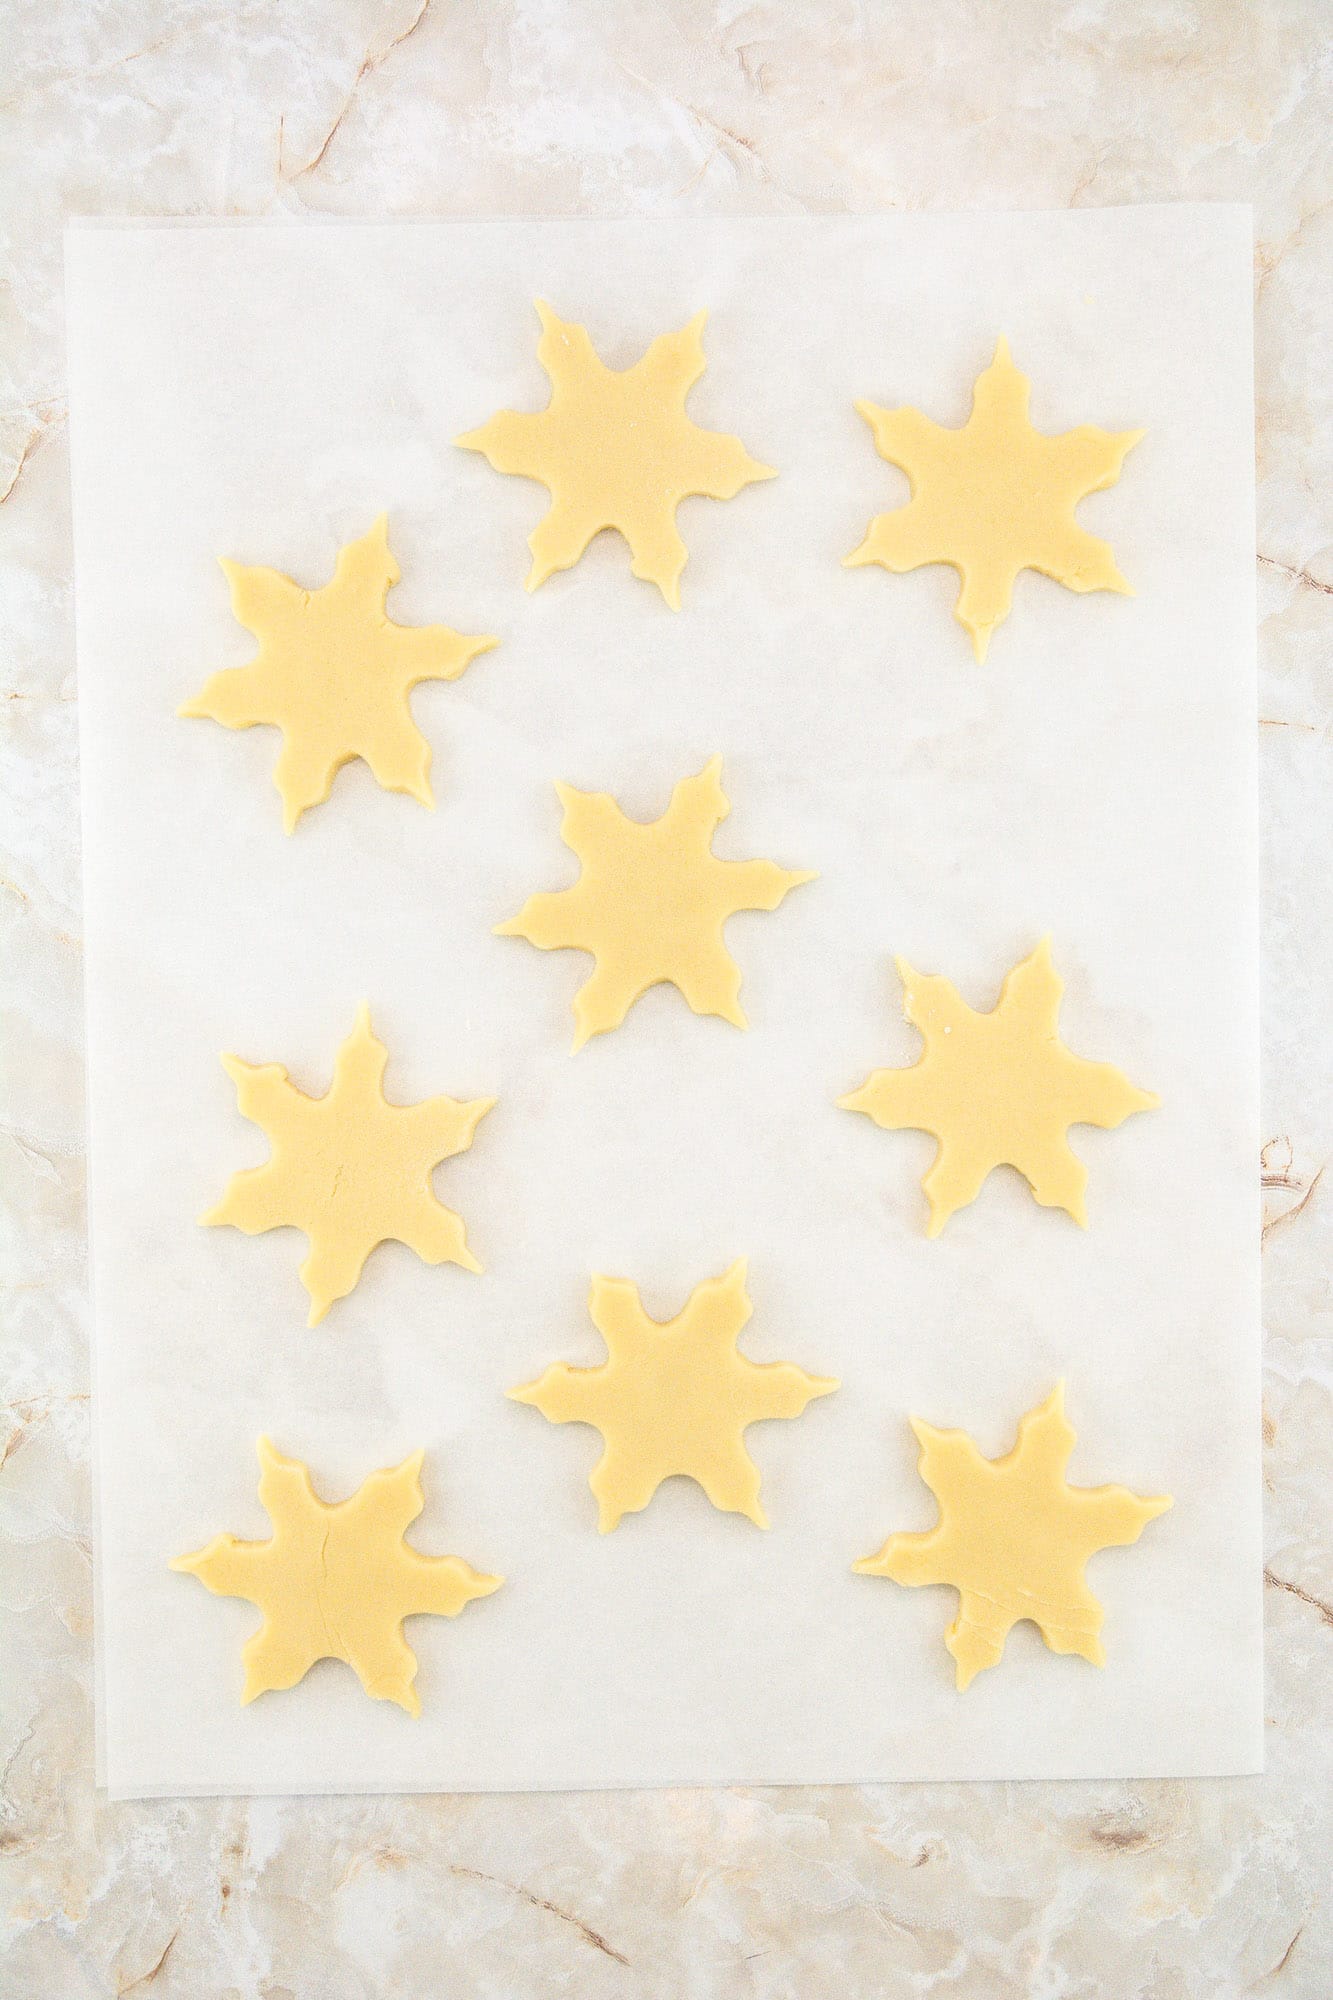 Snowflake shaped cut out cookies placed on parchment paper